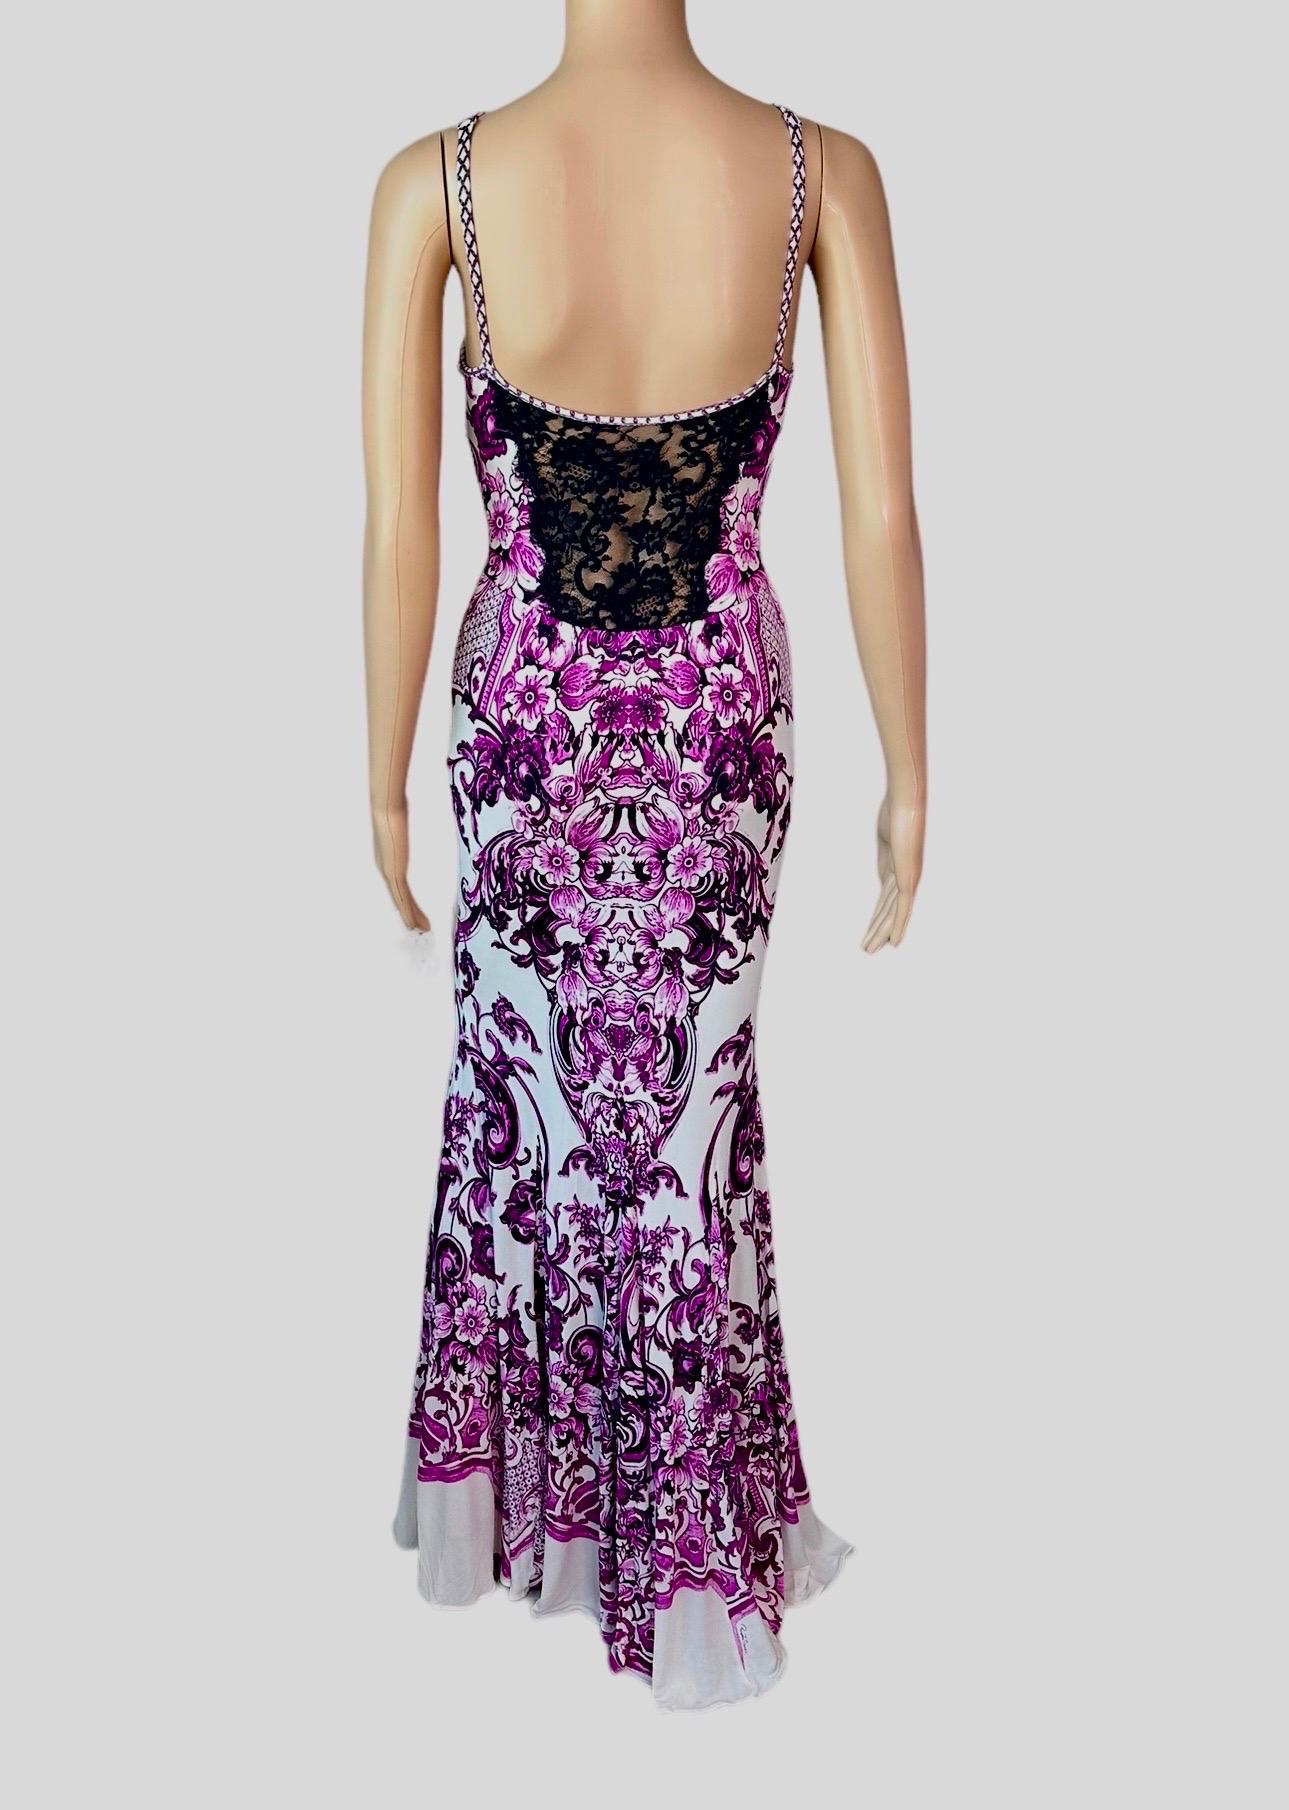 Roberto Cavalli Resort 2013 Chinoiserie Ming Porcelain Sheer Lace Evening Dress For Sale 1